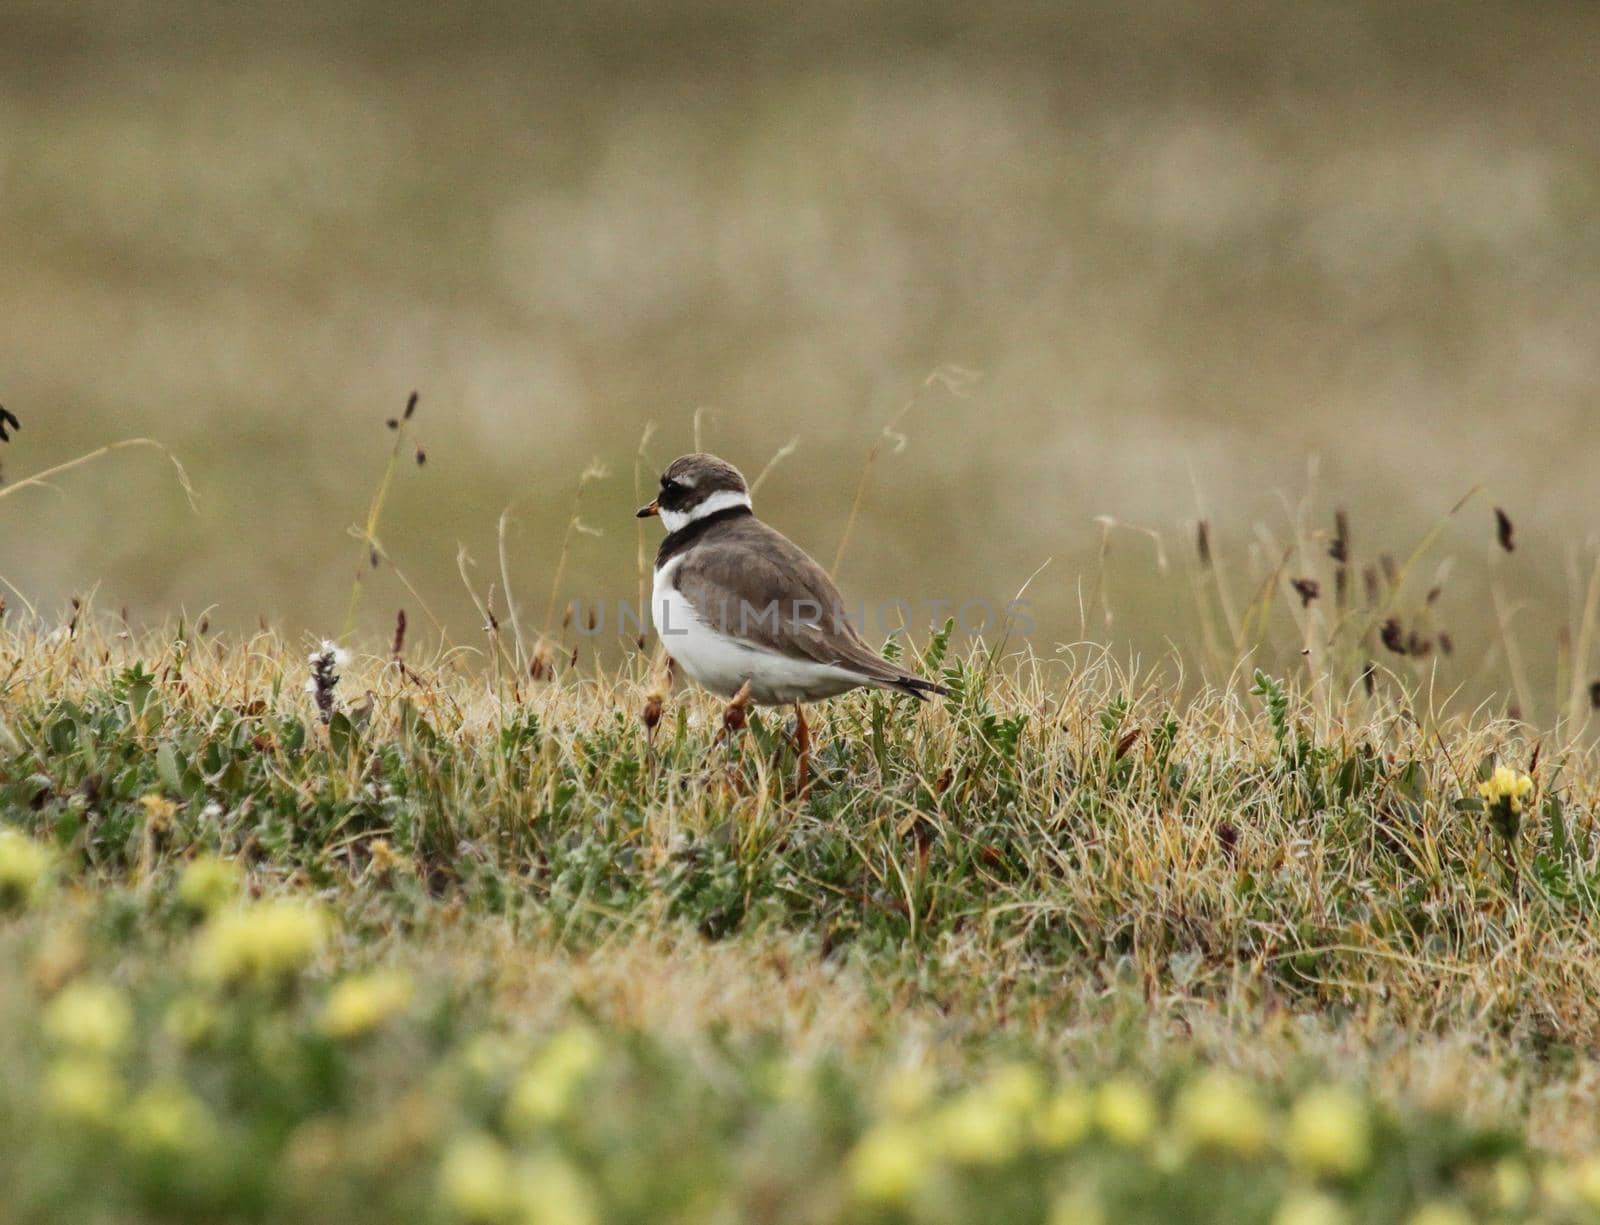 Common ringed plover walking along a grassy tundra in Canada's arctic by Granchinho